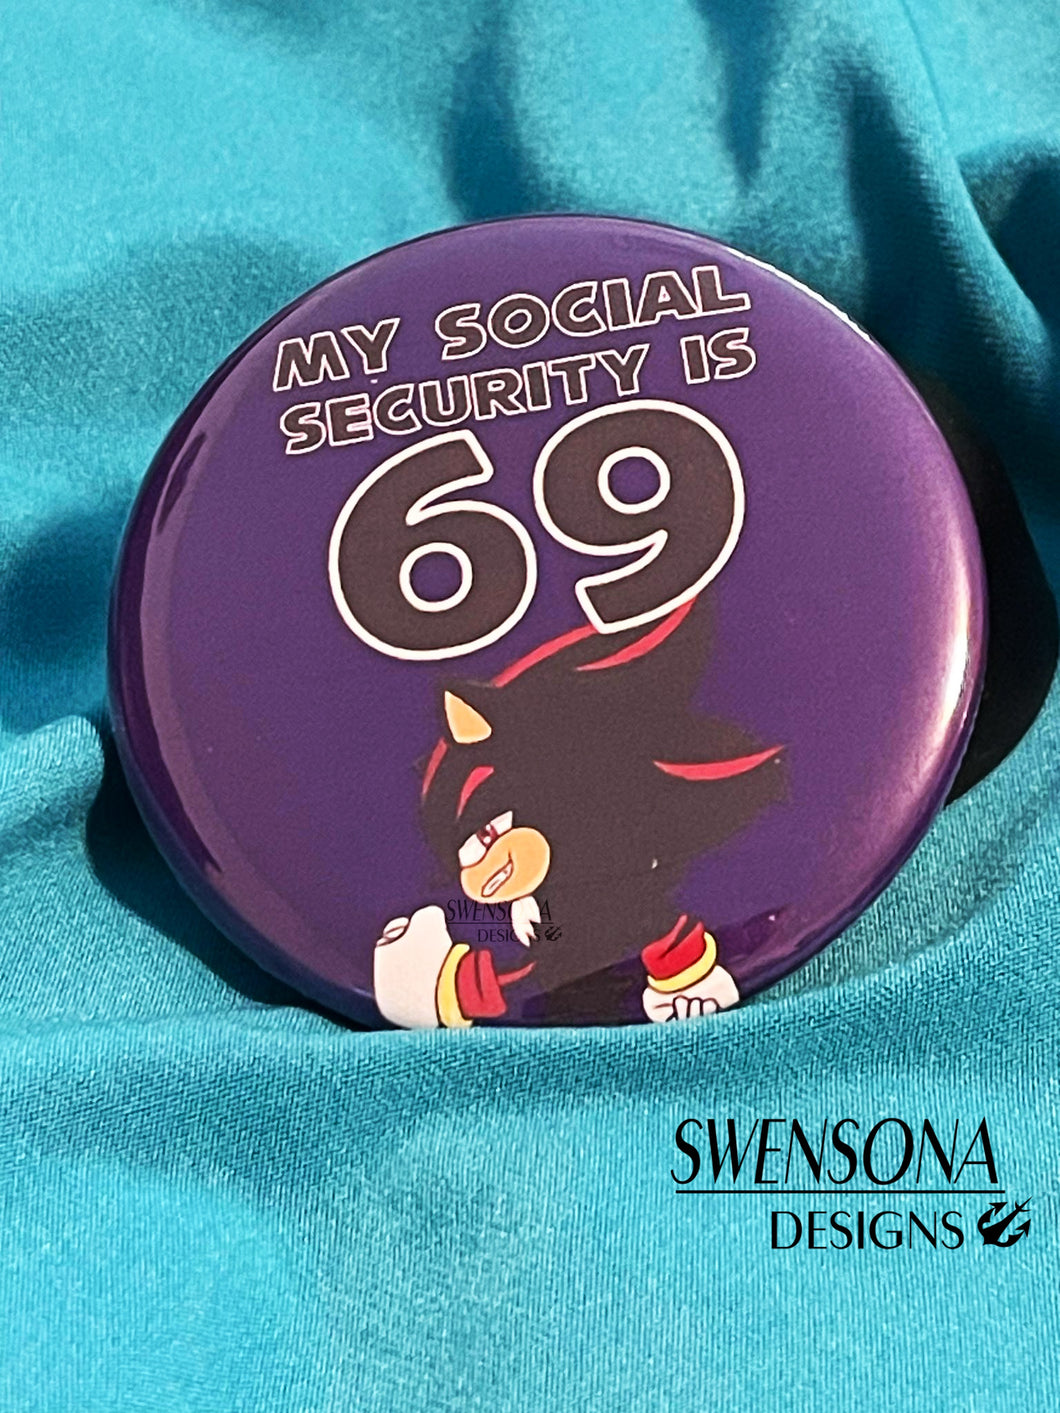 My social security is 69 button badge